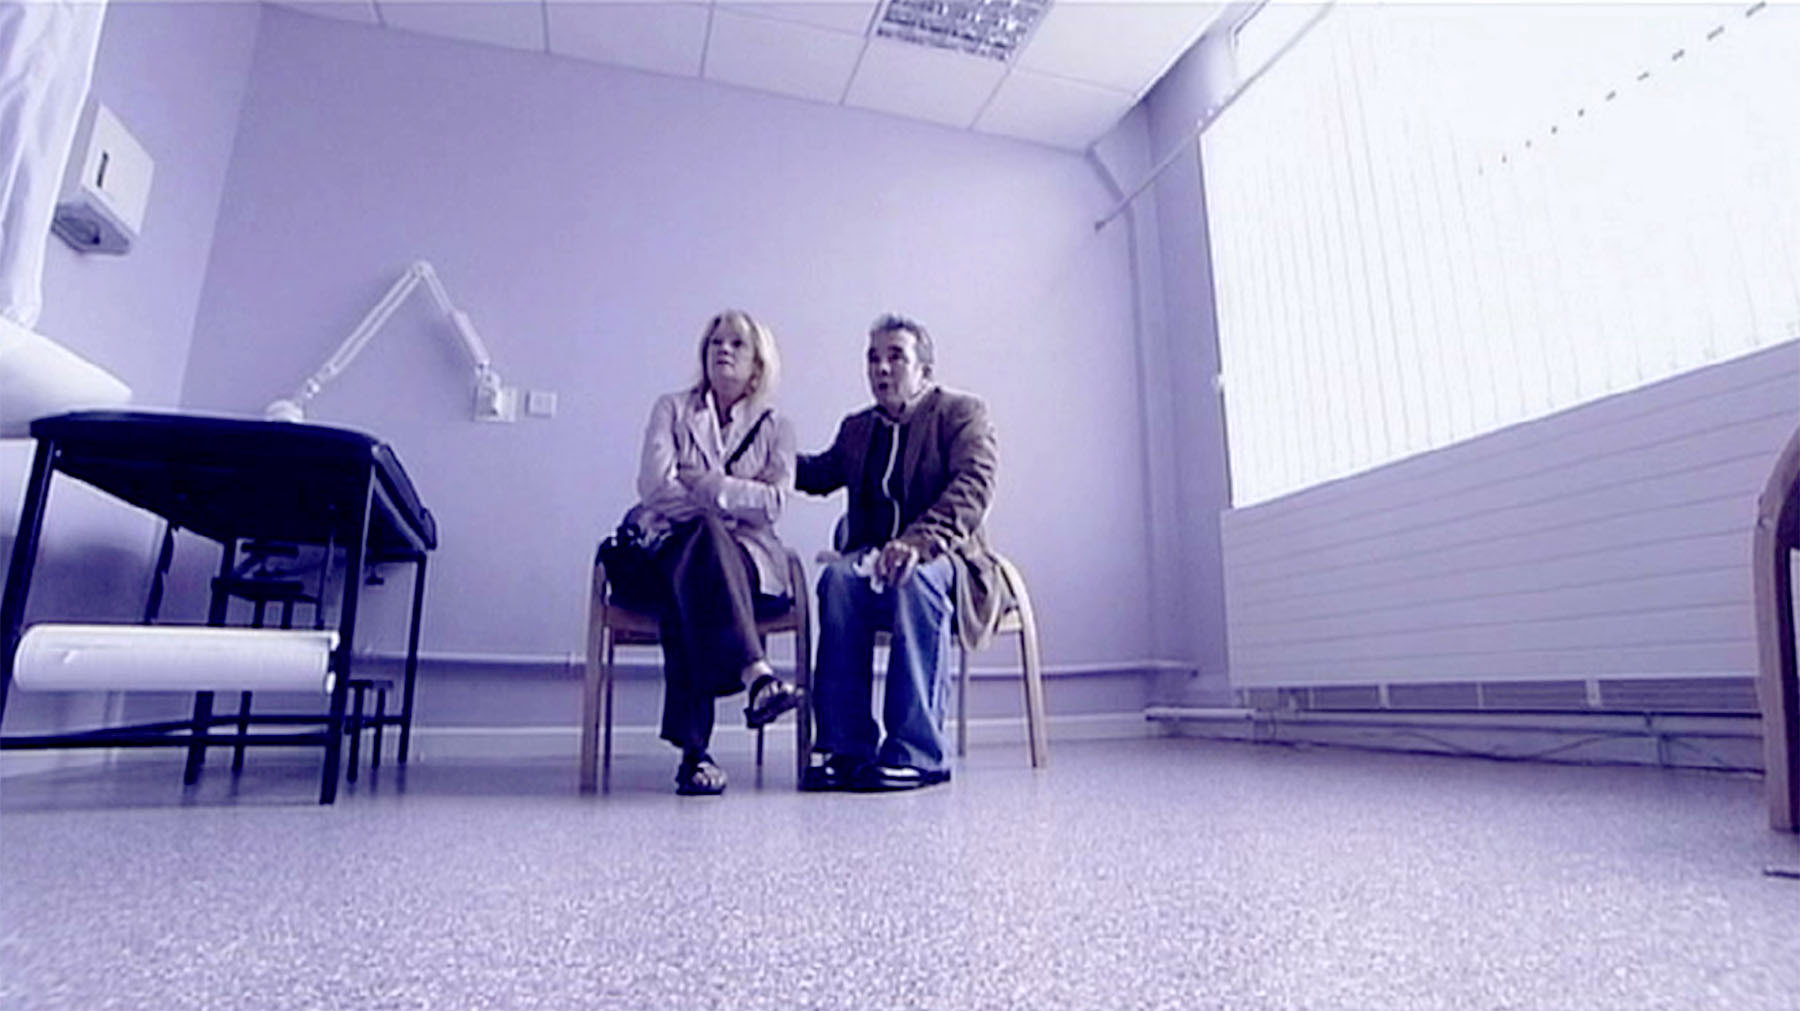 Still image from mental health documentary produced and directed by Stephen S T Bradley, a video director and producer working in Dublin, Ireland and throughout Ireland and the UK - image 2